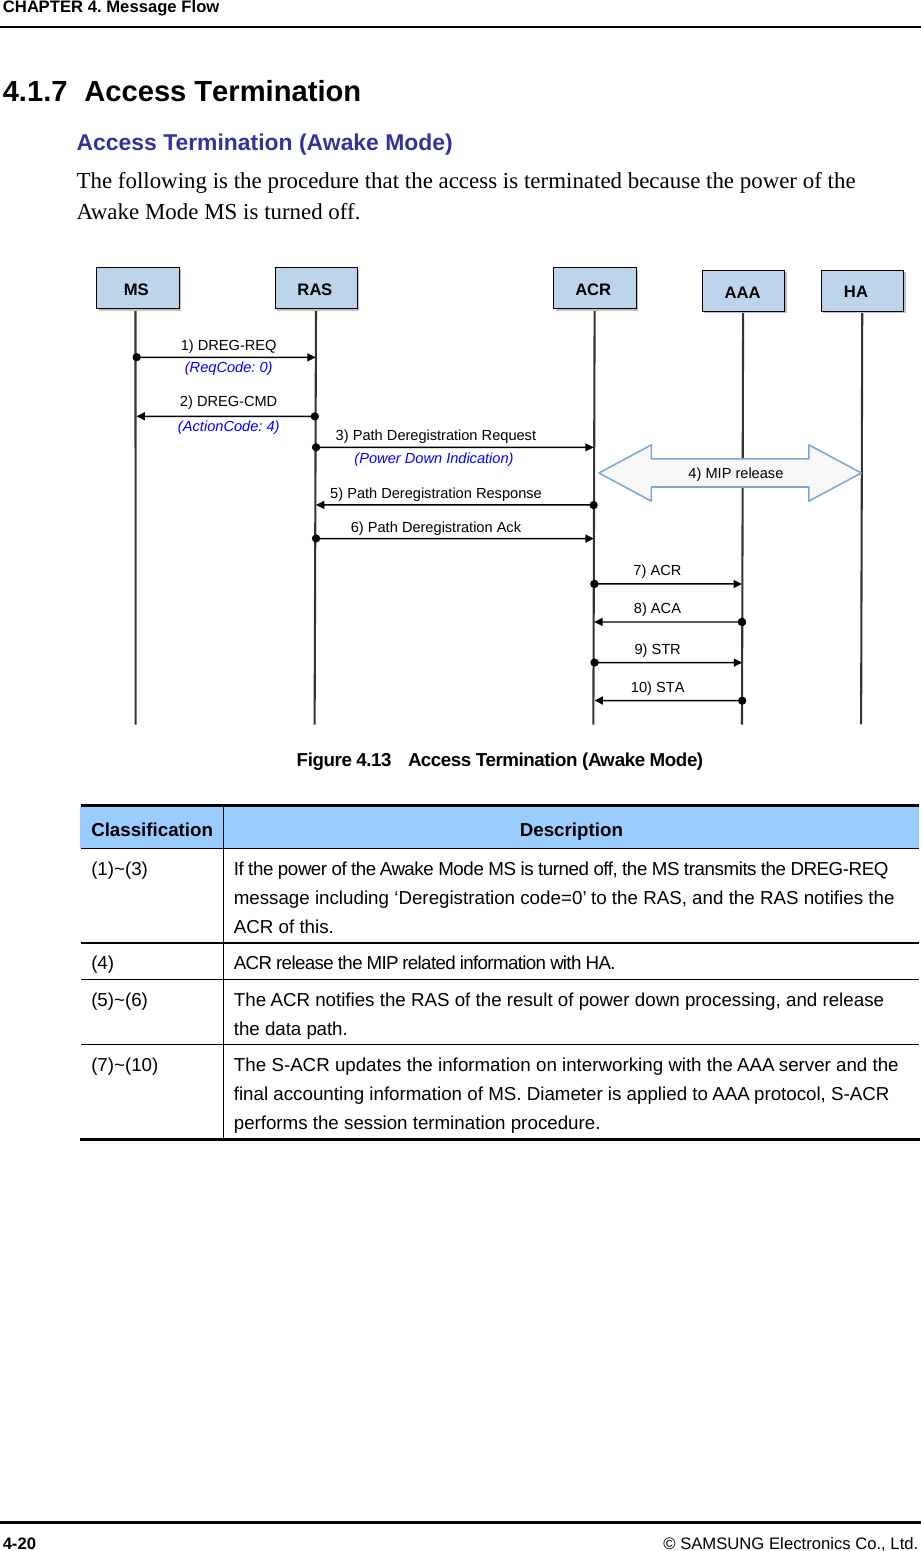 CHAPTER 4. Message Flow 4-20 © SAMSUNG Electronics Co., Ltd. 4.1.7 Access Termination Access Termination (Awake Mode) The following is the procedure that the access is terminated because the power of the Awake Mode MS is turned off.    Figure 4.13    Access Termination (Awake Mode)  Classification Description (1)~(3)  If the power of the Awake Mode MS is turned off, the MS transmits the DREG-REQ message including ‘Deregistration code=0’ to the RAS, and the RAS notifies the ACR of this. (4)  ACR release the MIP related information with HA. (5)~(6)  The ACR notifies the RAS of the result of power down processing, and release the data path. (7)~(10)  The S-ACR updates the information on interworking with the AAA server and the final accounting information of MS. Diameter is applied to AAA protocol, S-ACR performs the session termination procedure.  MS RAS  ACR AAA 1) DREG-REQ (ReqCode: 0) 3) Path Deregistration Request 7) ACR 2) DREG-CMD (ActionCode: 4) (Power Down Indication) 8) ACA 5) Path Deregistration Response 6) Path Deregistration Ack 9) STR 10) STA HA 4) MIP release 